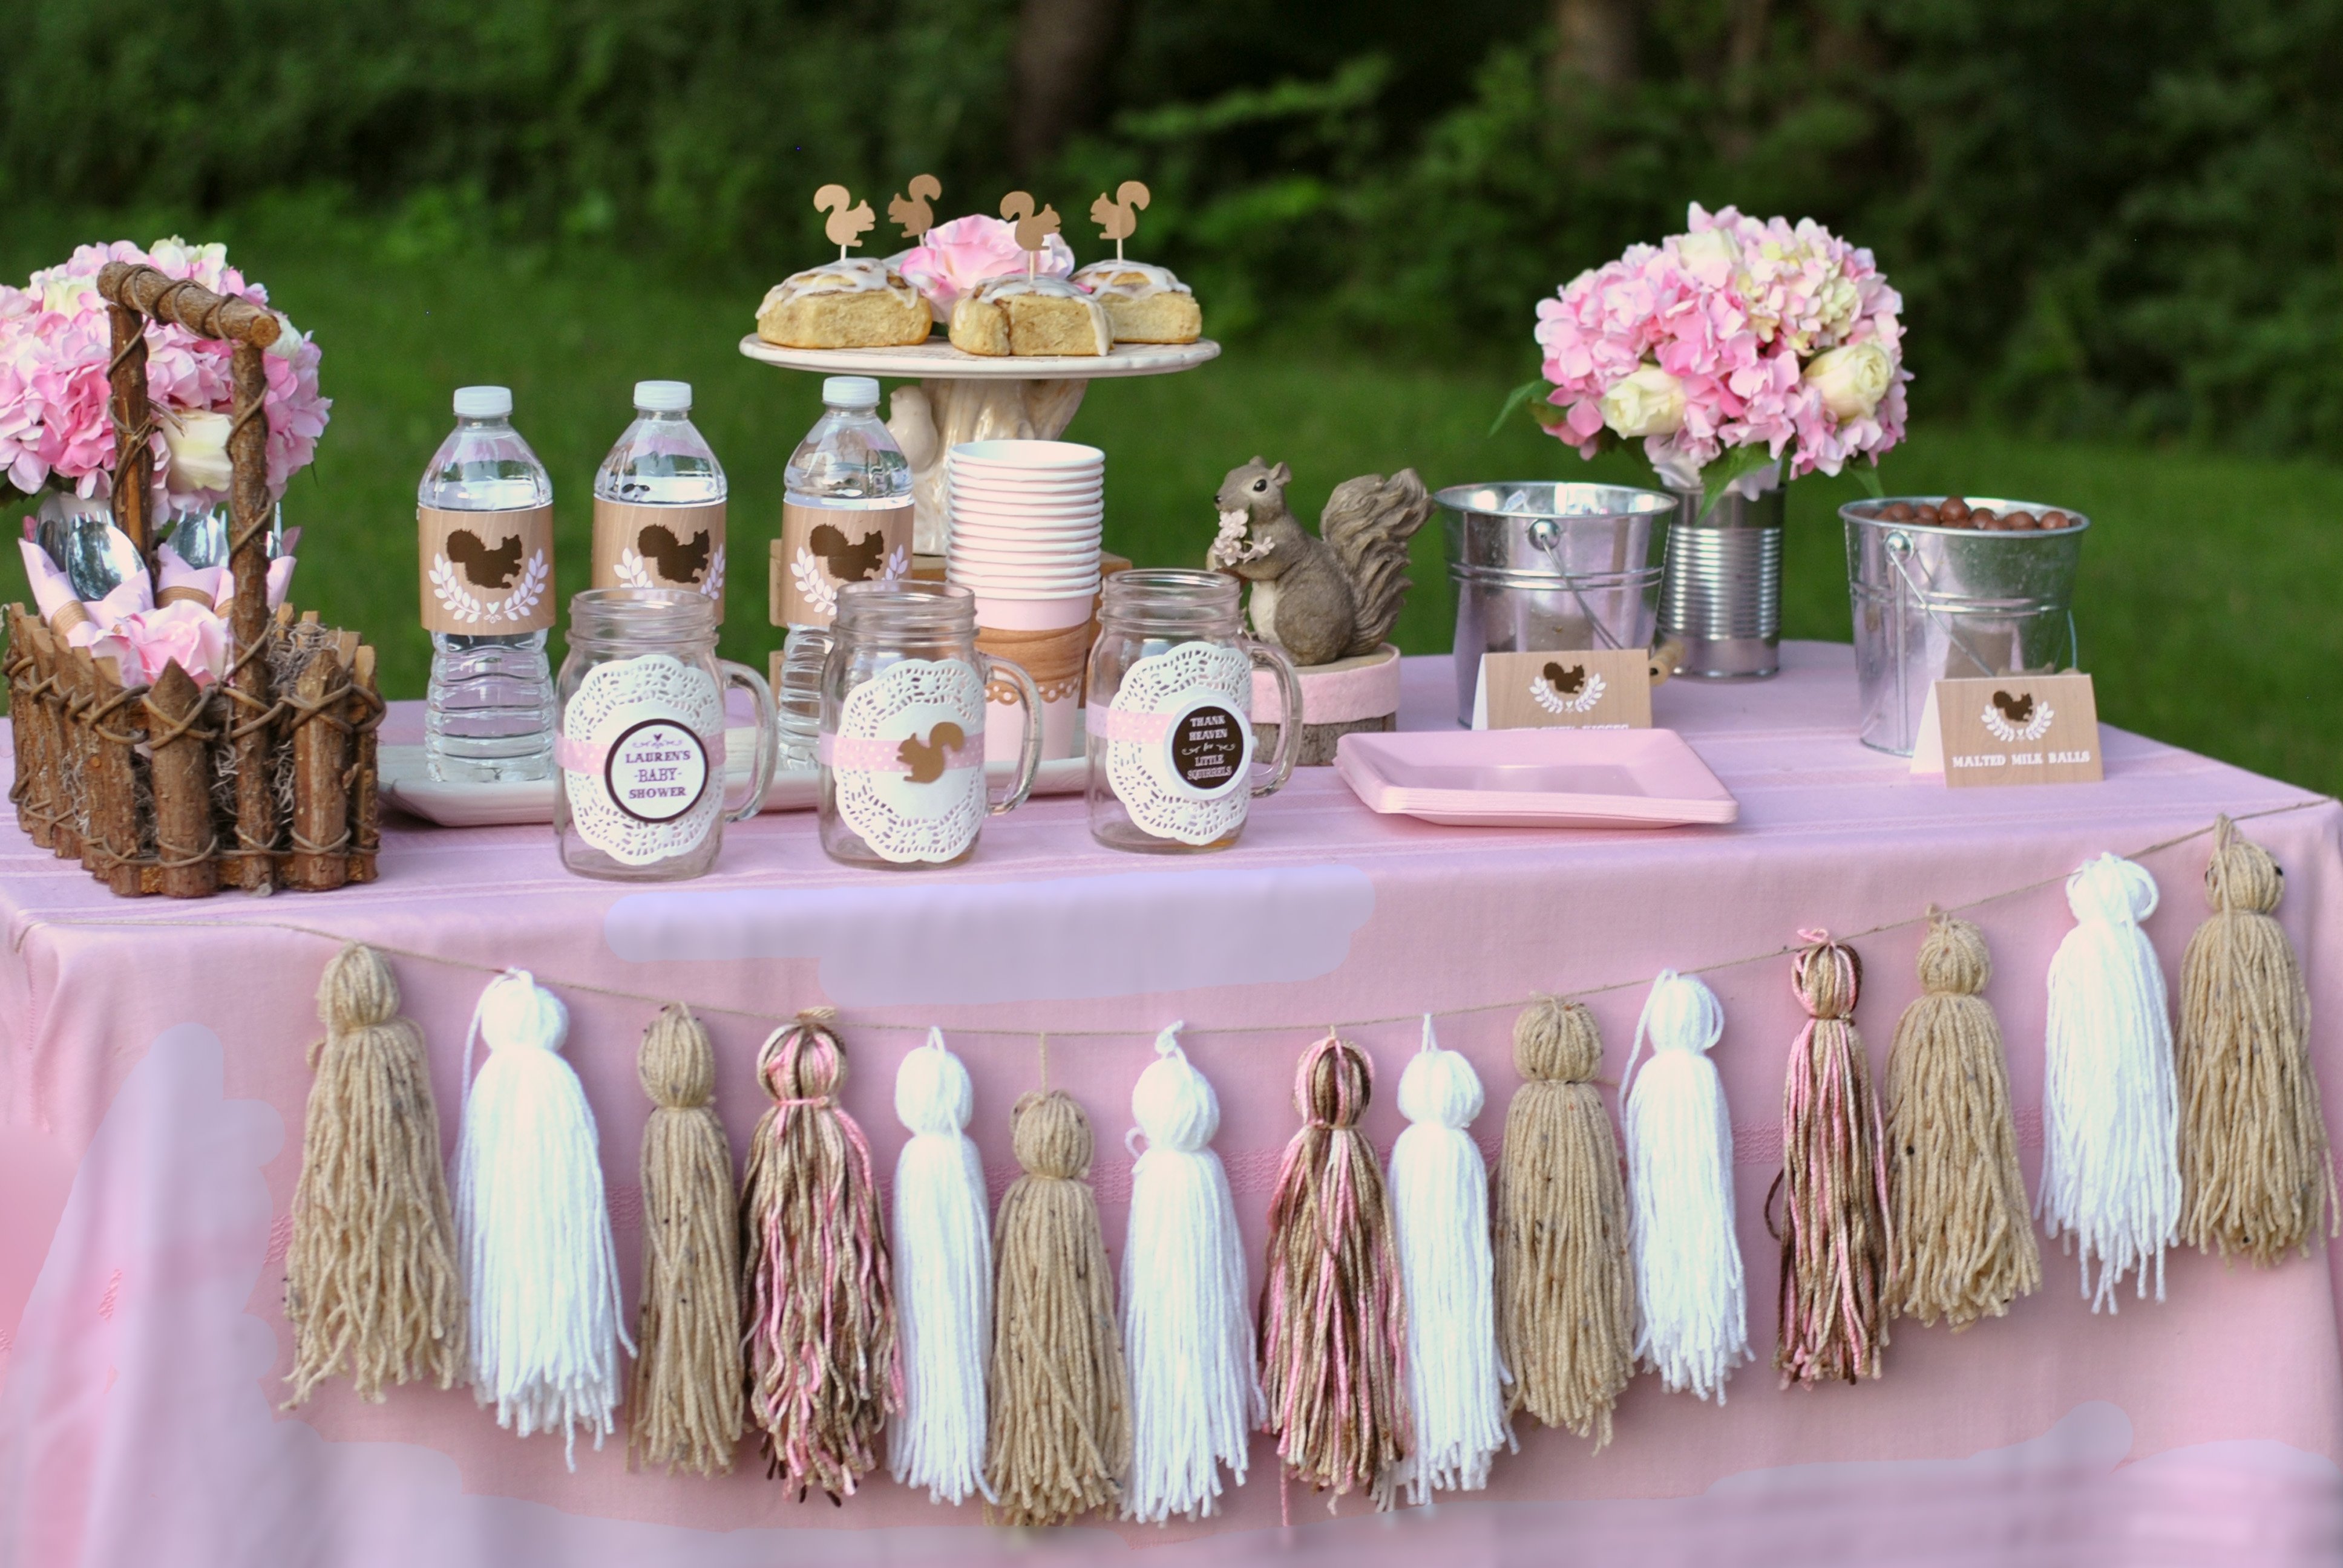 10 Ideal Baby Girl Shower Theme Ideas baby shower theme ideas for girl omega center ideas for baby 13 2022